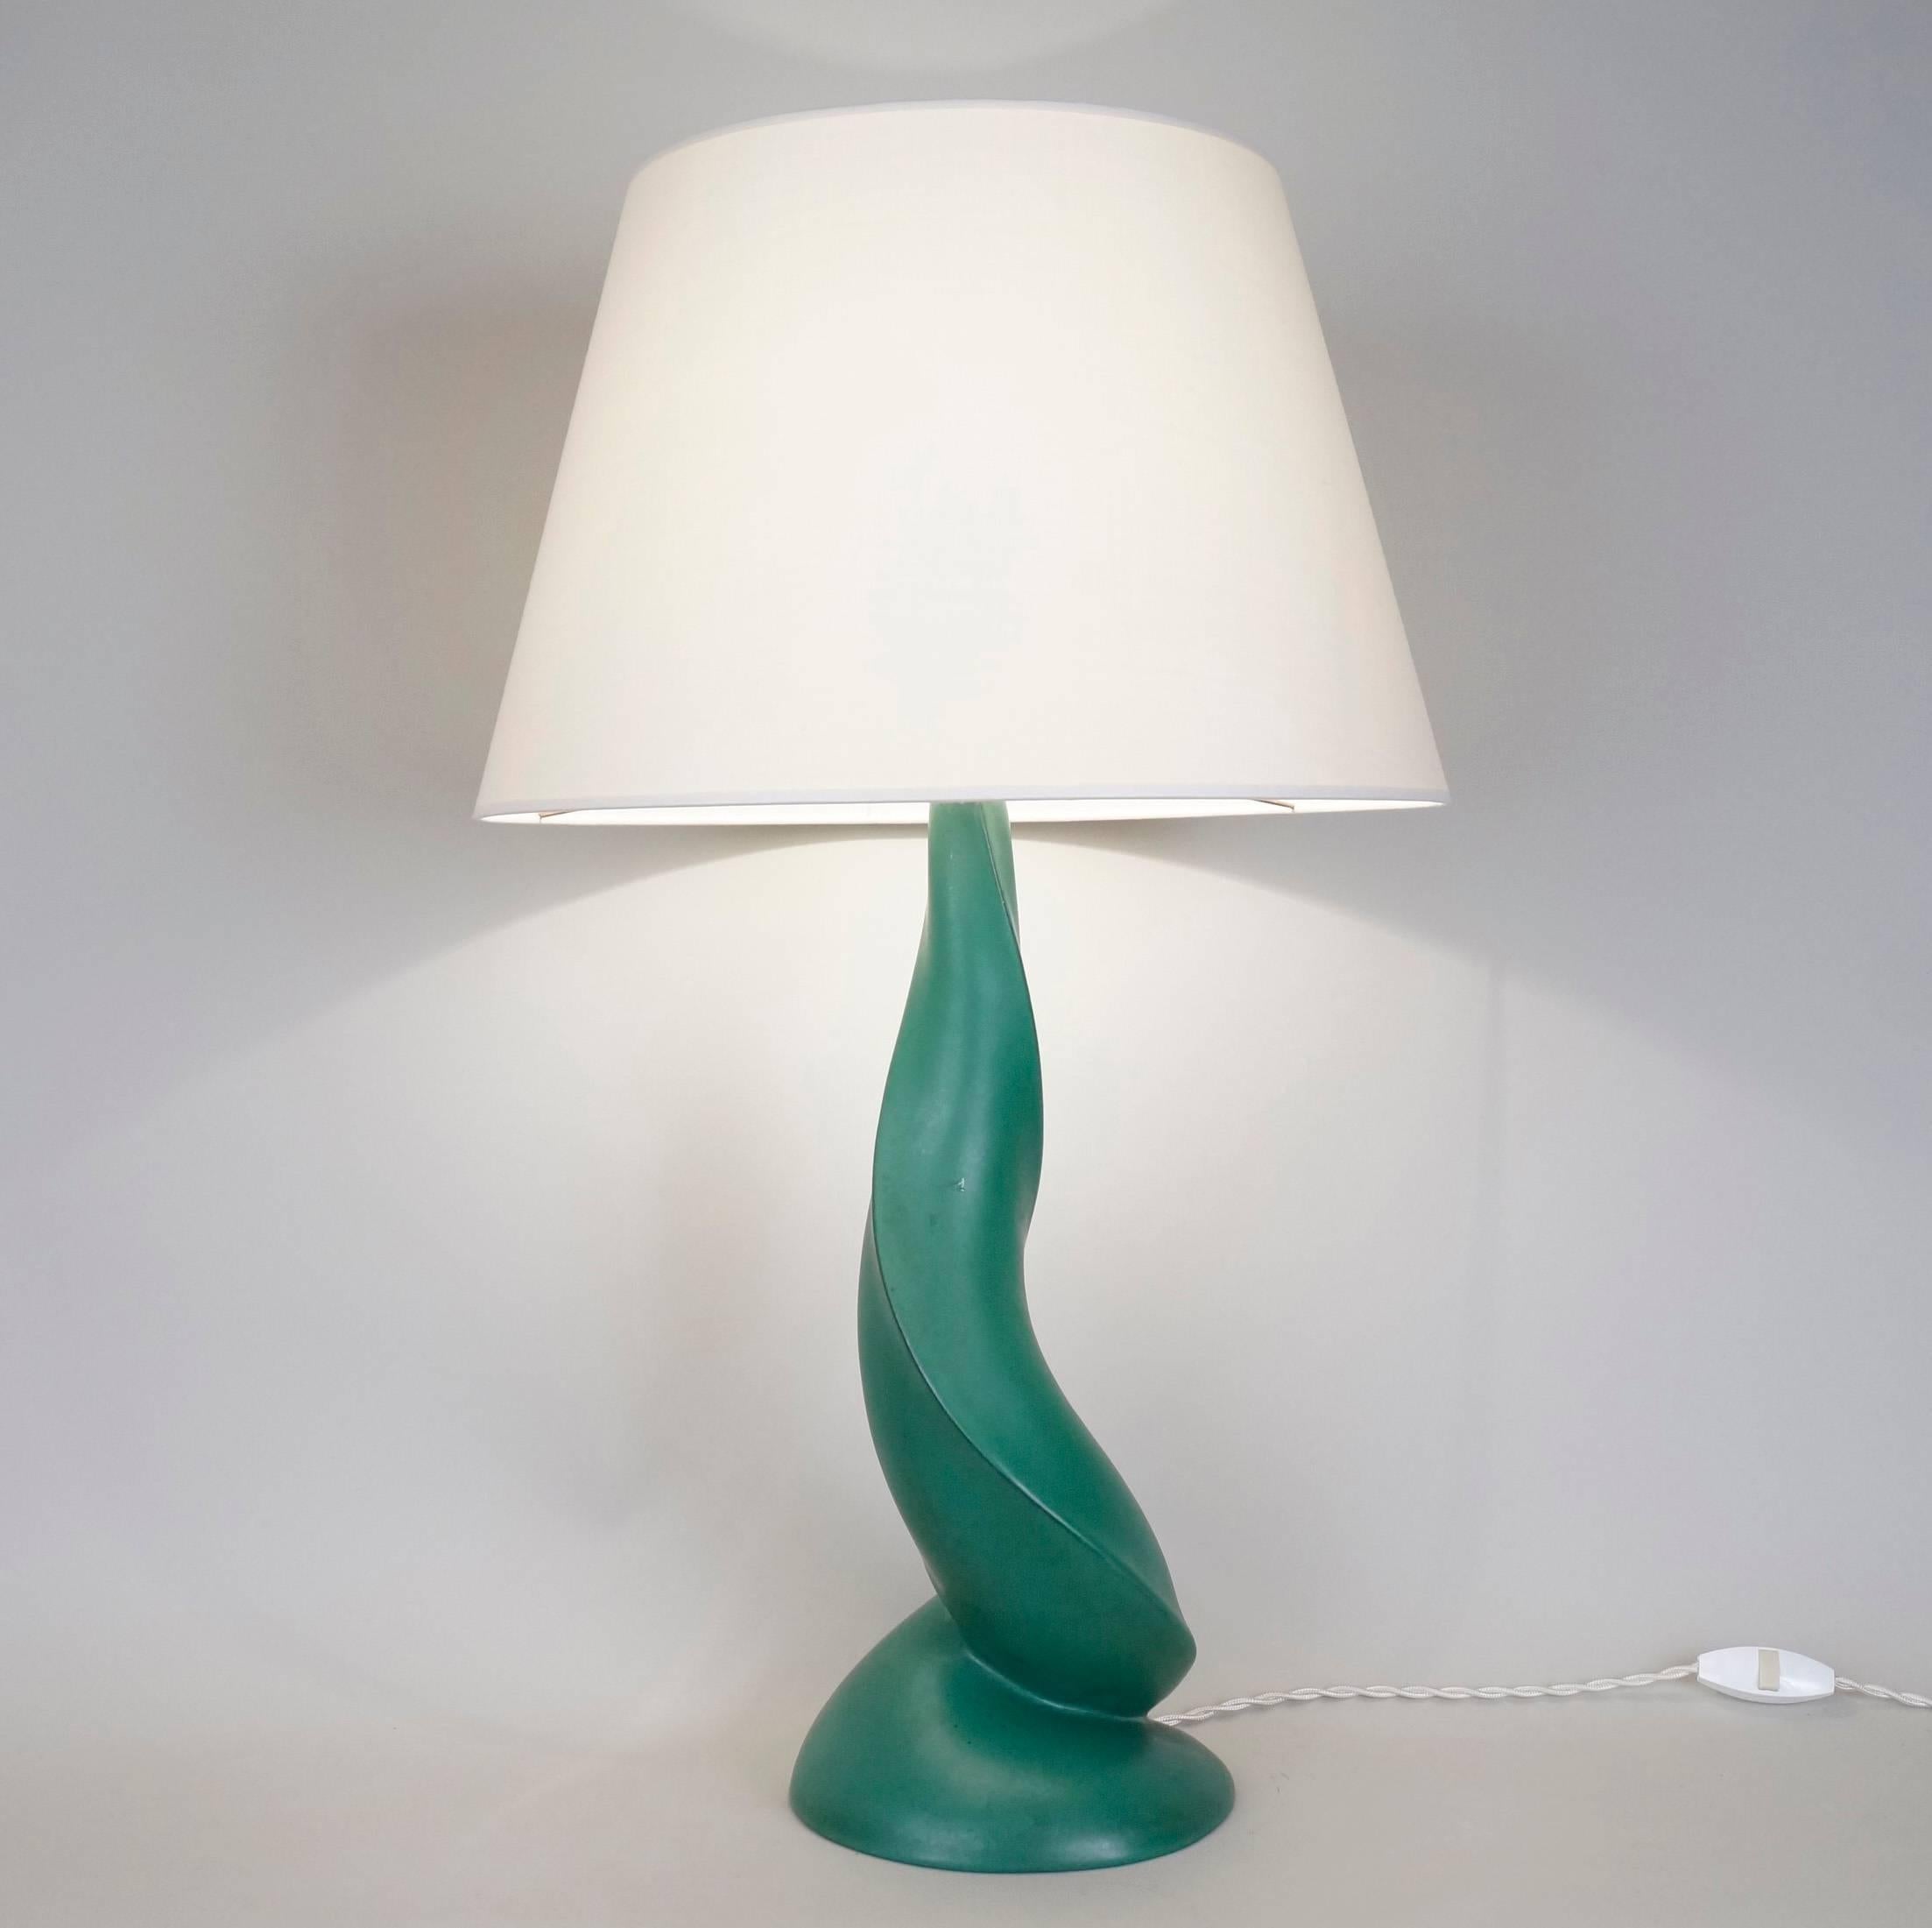 Green satin ceramic table lamp by Francis Cova signed on the back.
Custom-made fabric lampshade.
Rewired with twisted silk cord.
US standard plug on request.
Ceramic body height: 39 cm - 15.4 in.
Height with lampshade: 61 cm - 24 in.